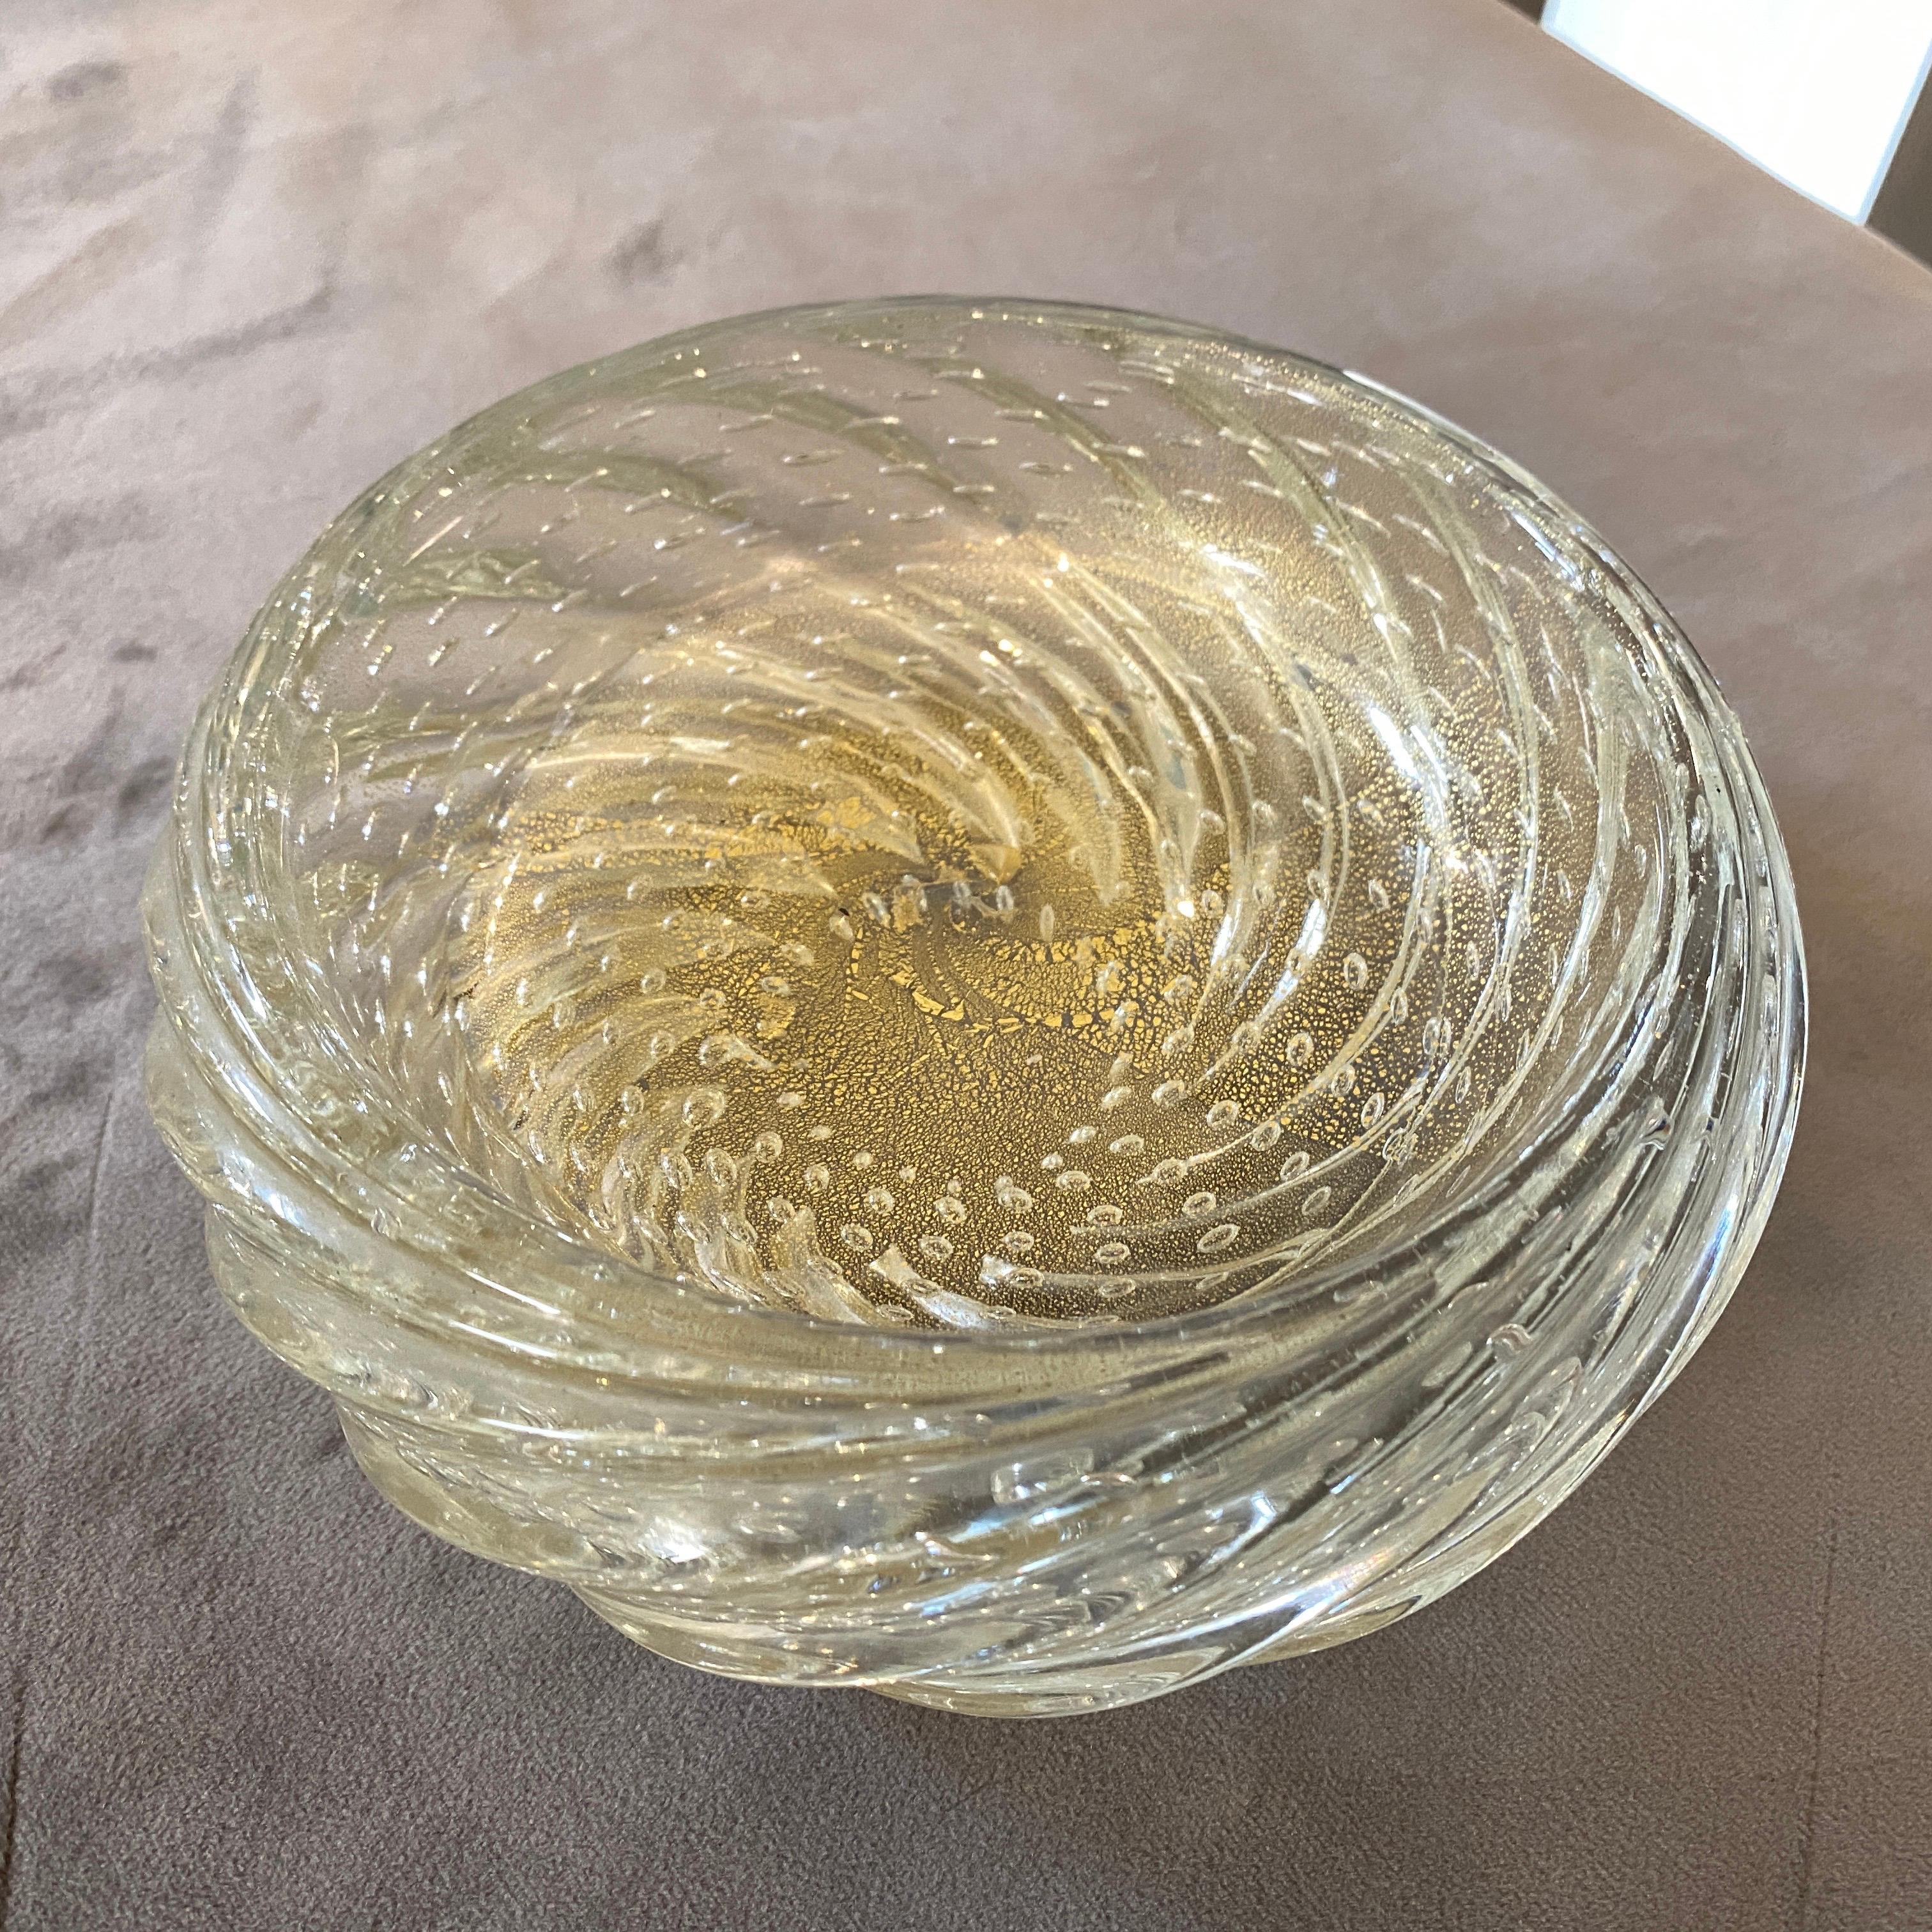 A transparent and gold Murano glass ashtray in perfect conditions made by Barovier in the 1960s.